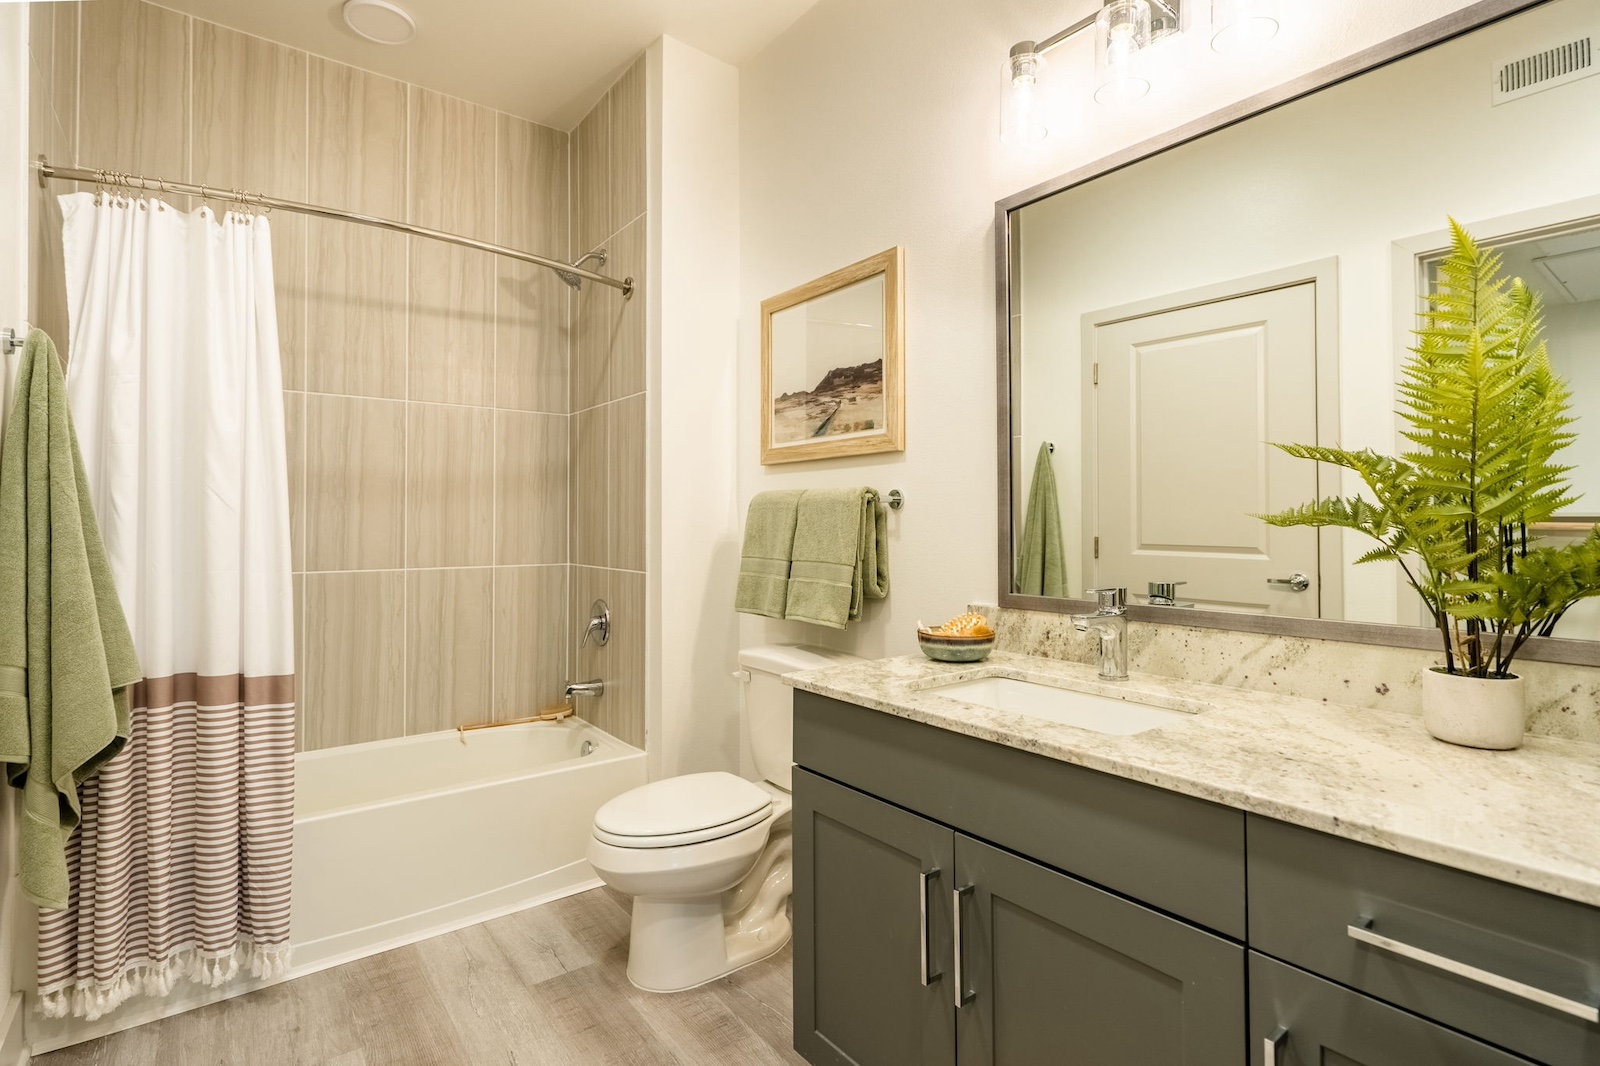 Bathroom with granite countertops and modern tile at our Cypress, TX apartments for rent. Residences